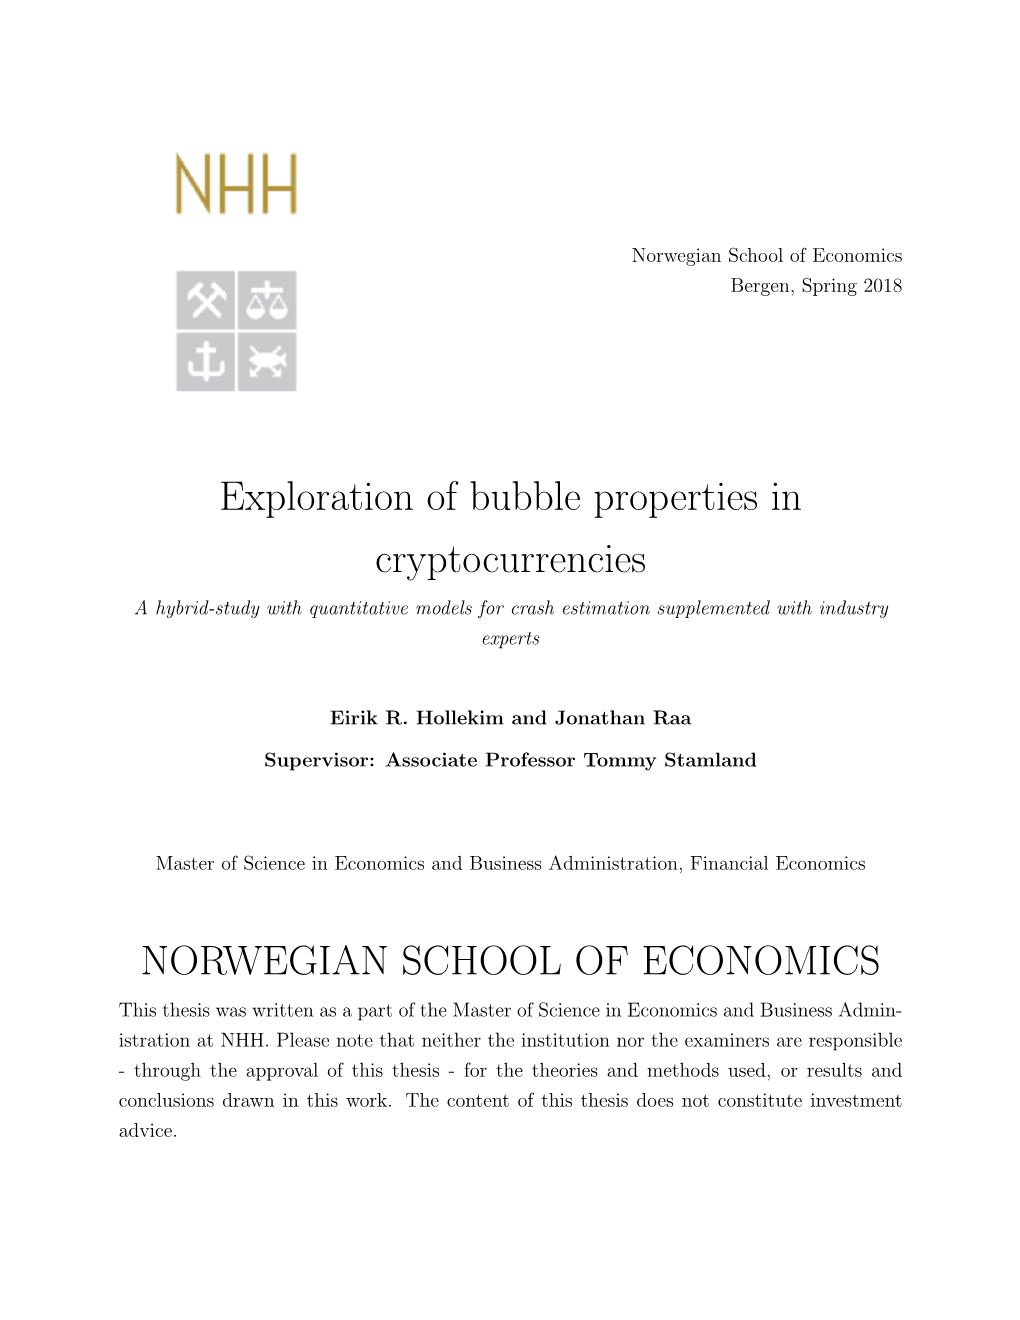 Exploration of Bubble Properties in Cryptocurrencies a Hybrid-Study with Quantitative Models for Crash Estimation Supplemented with Industry Experts